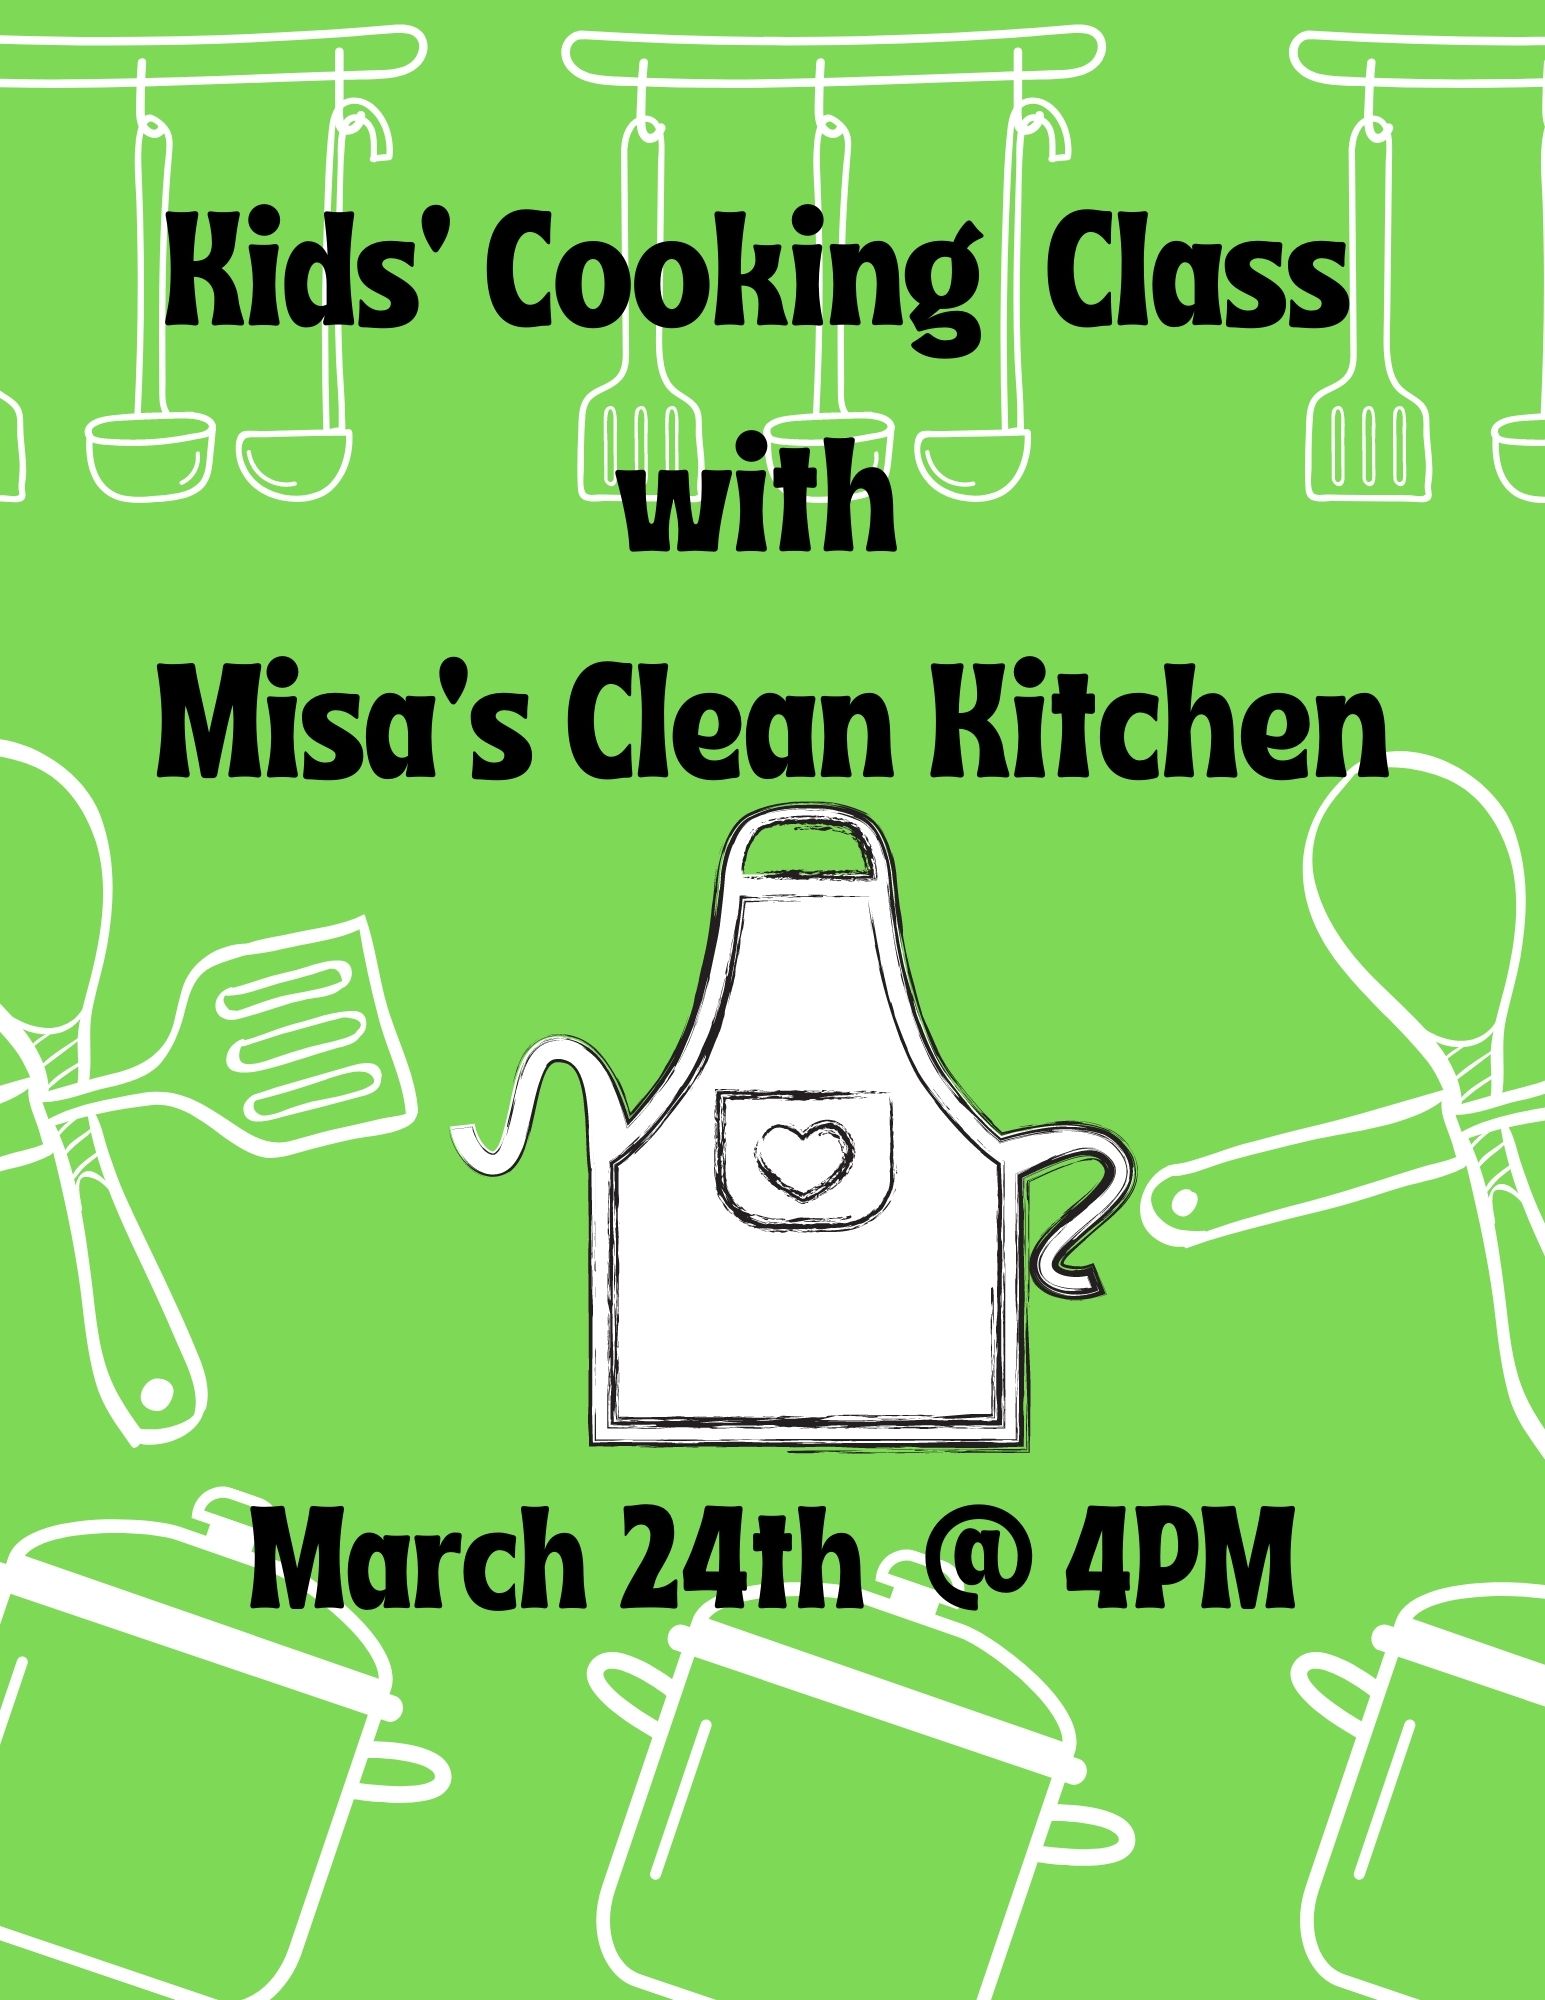 Kids' Cooking Class with Misa's Clean Kitchen March 24 @ 4 PM on green background featuring white images of cooking utensils and an apron